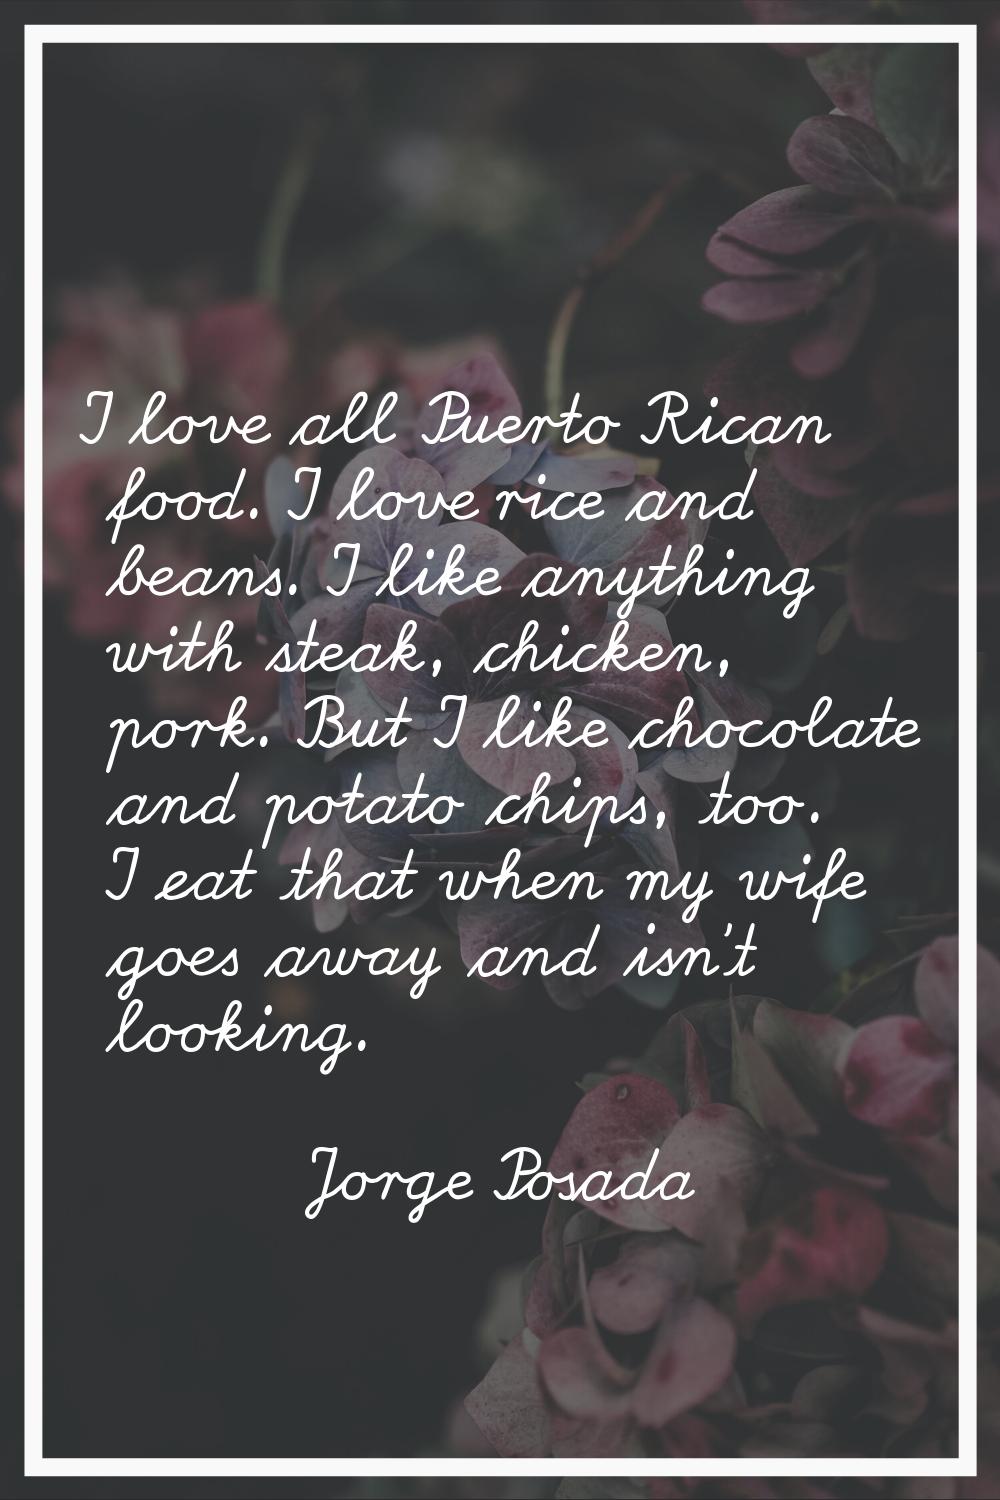 I love all Puerto Rican food. I love rice and beans. I like anything with steak, chicken, pork. But